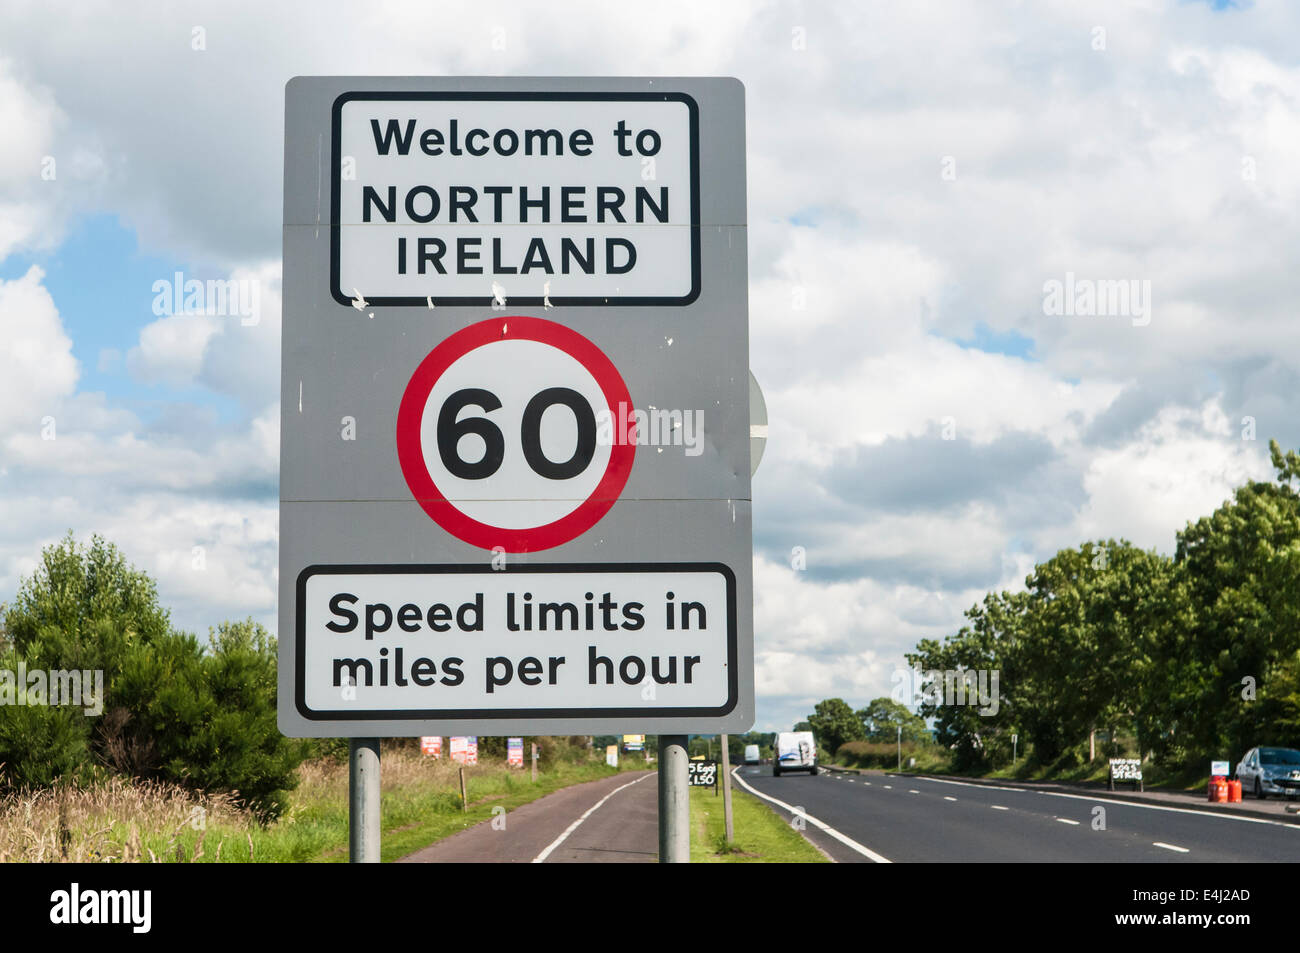 road-sign-at-the-northern-ireland-border-with-the-irish-republic-welcoming-E4J2AD.jpg